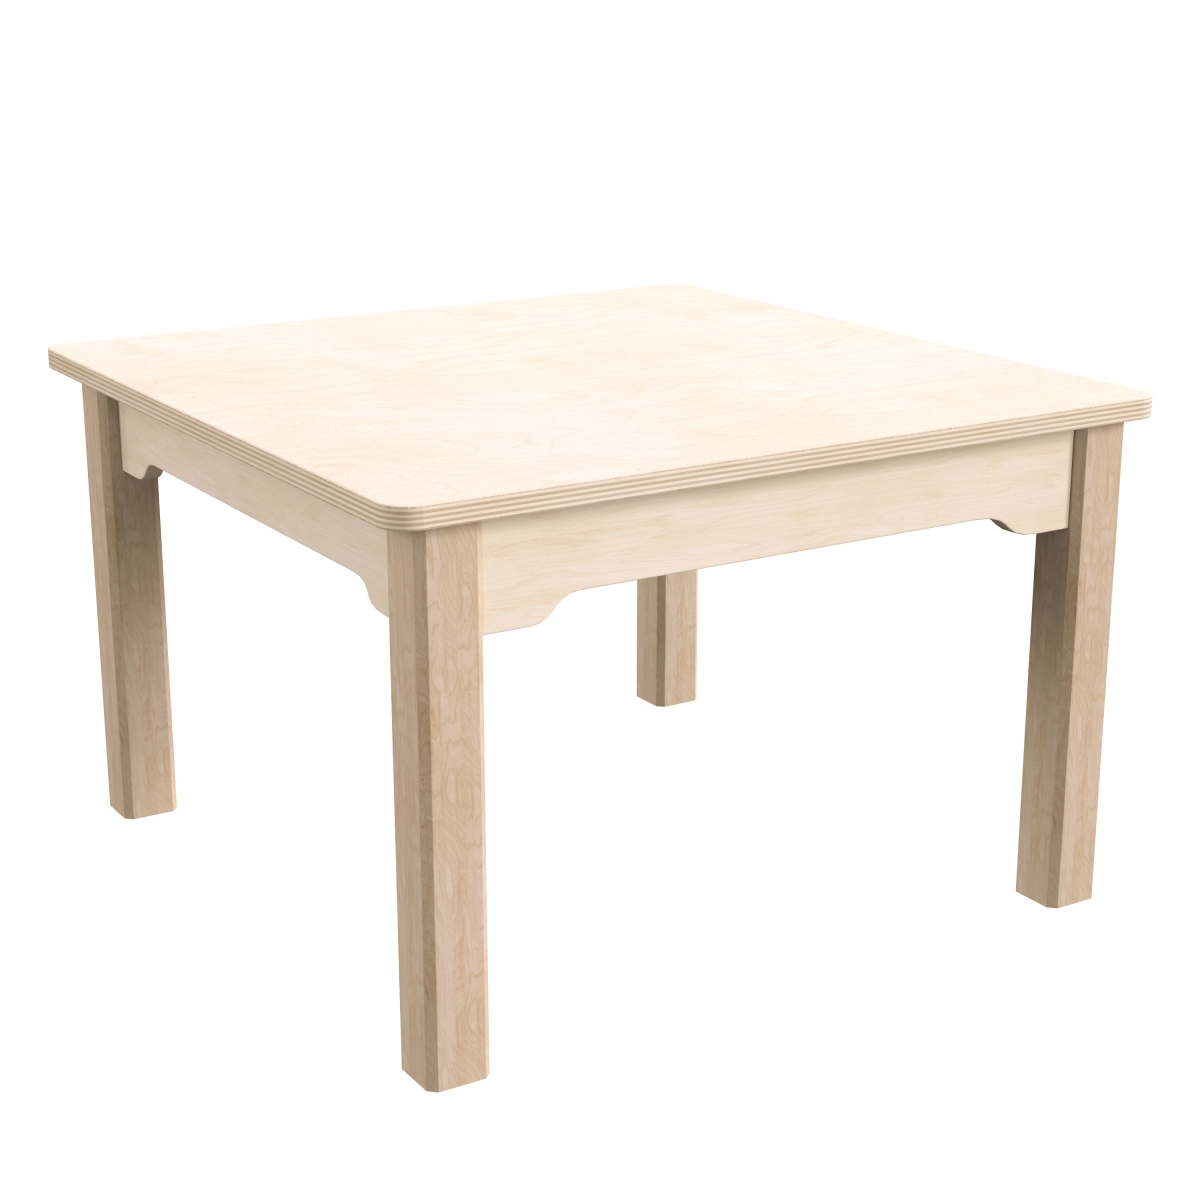 Picture of Flash Furniture MK-ME088007-GG 23.5 x 14.5 in. Bright Beginnings Commercial Grade Wooden Square Preschool Classroom Activity Table, Beech